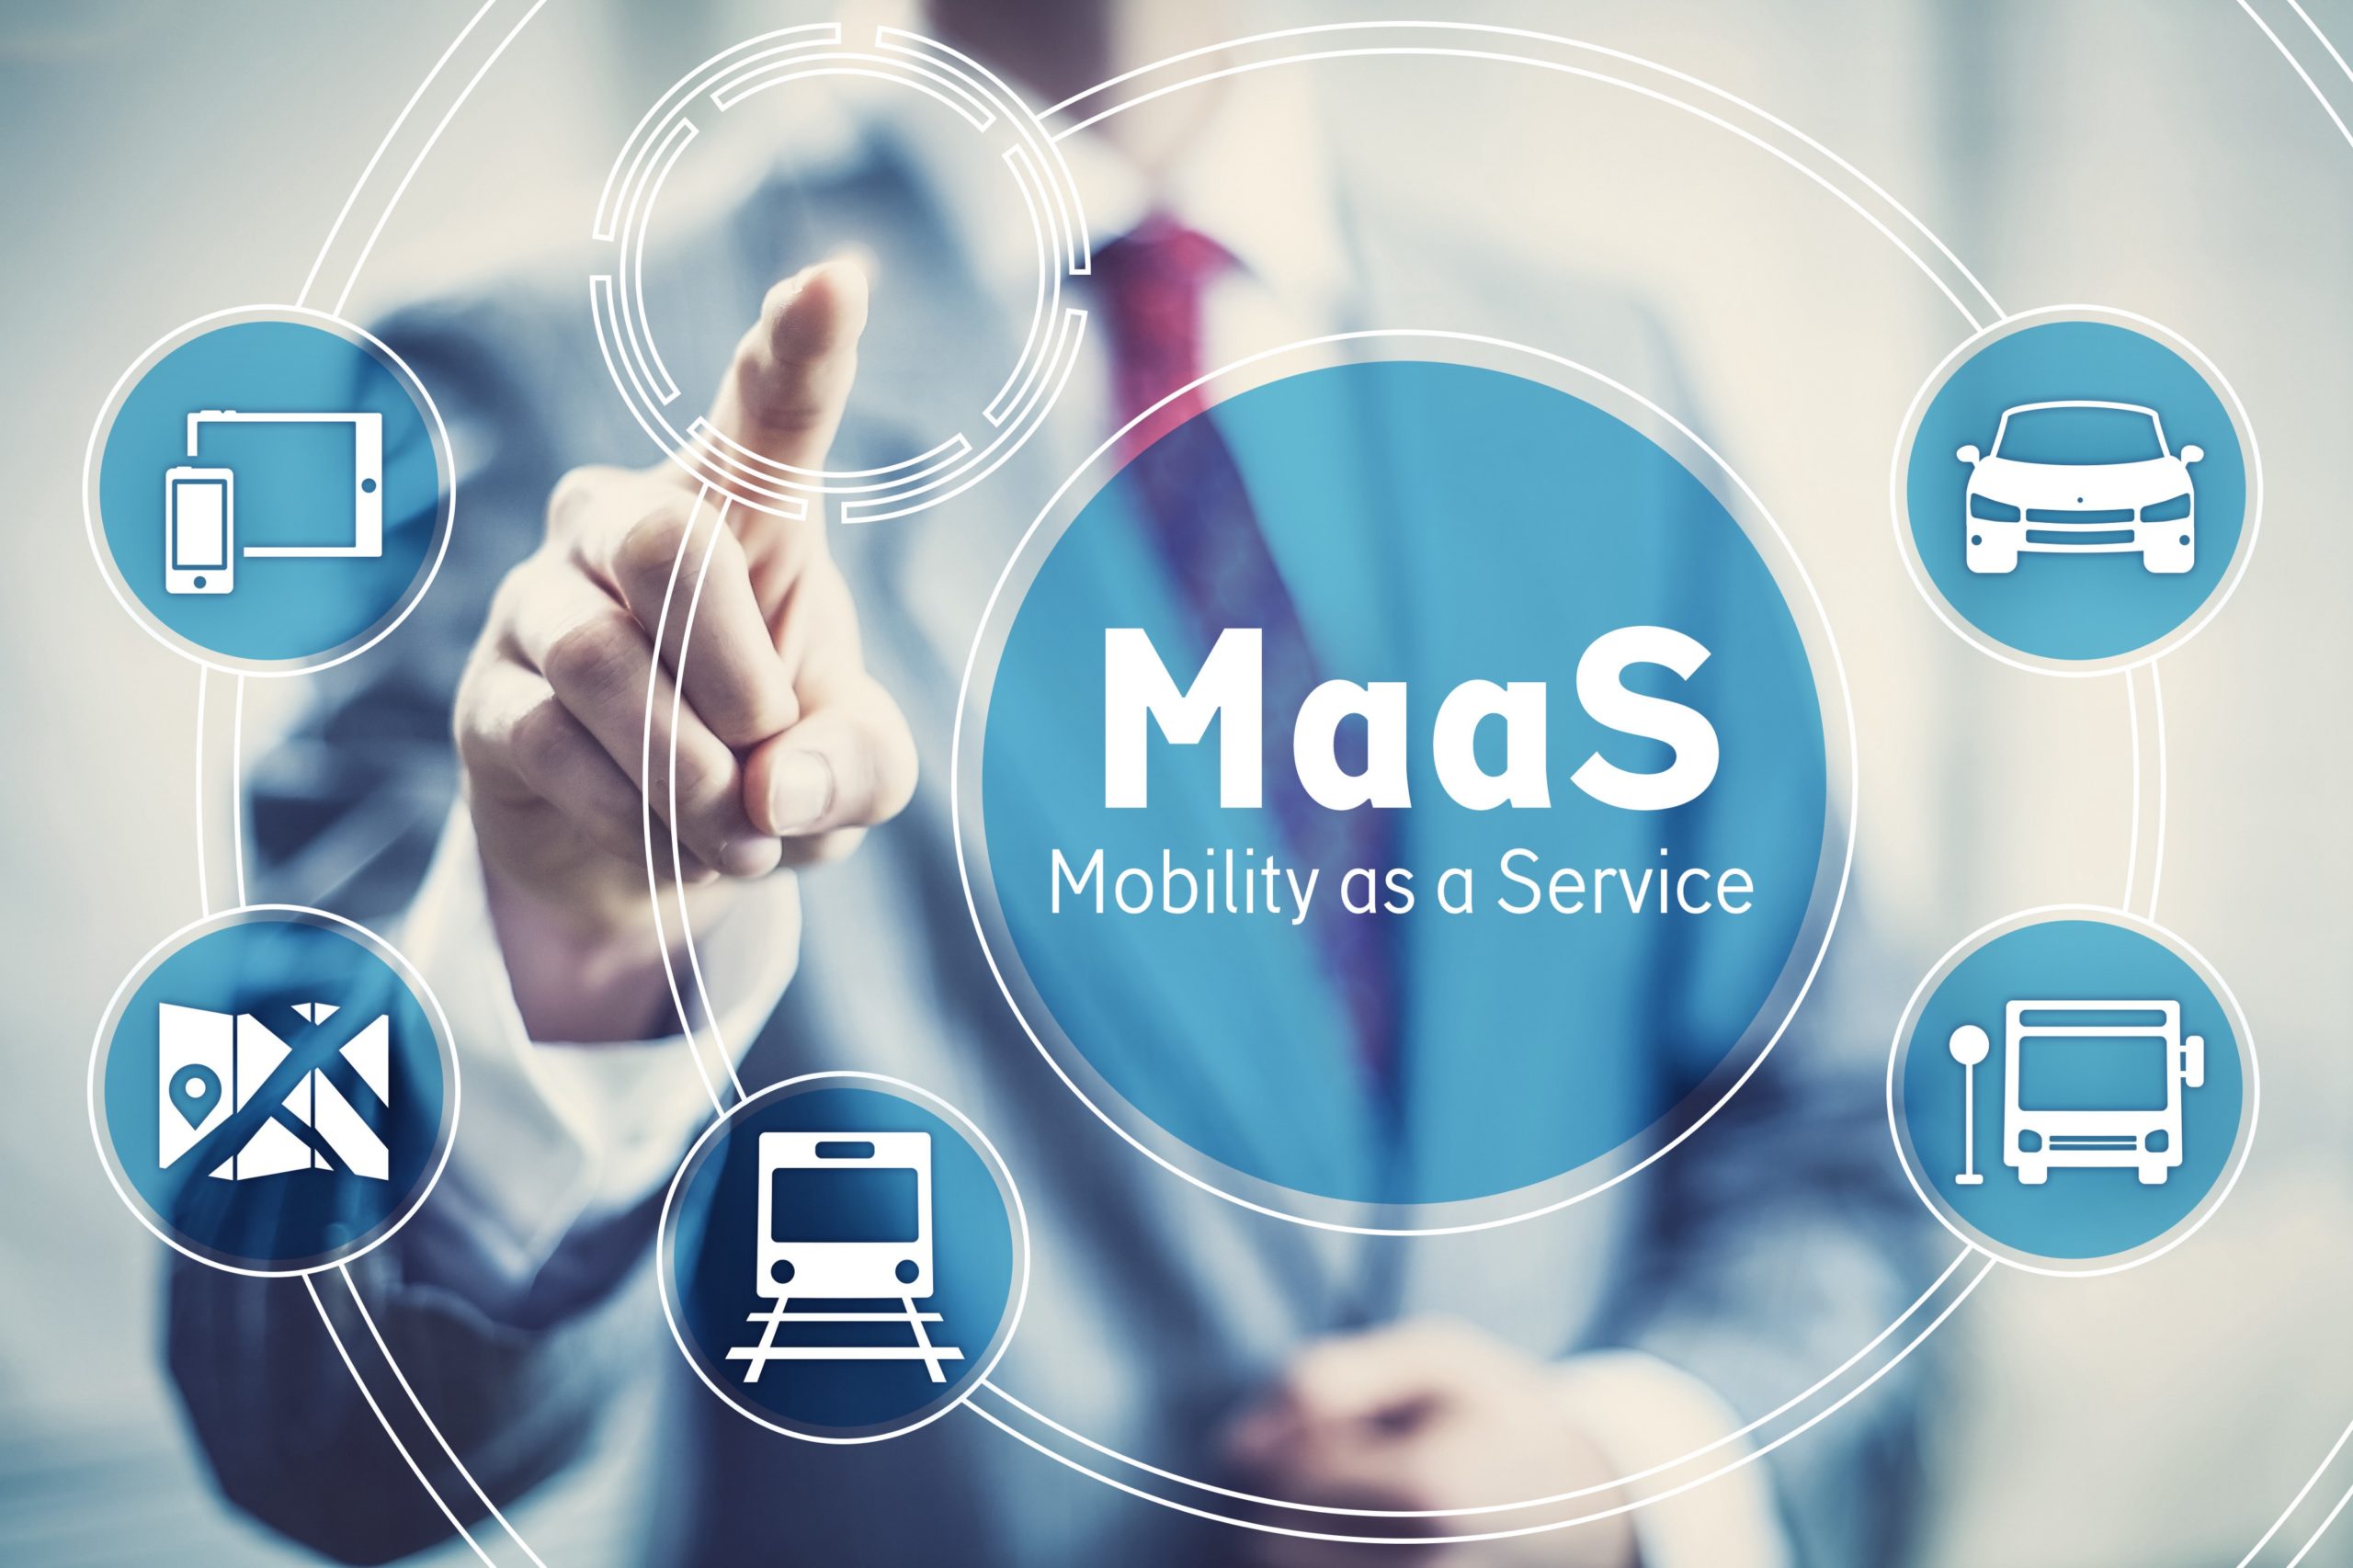 Car commuting can be reduced sharply by alternatives like MaaS